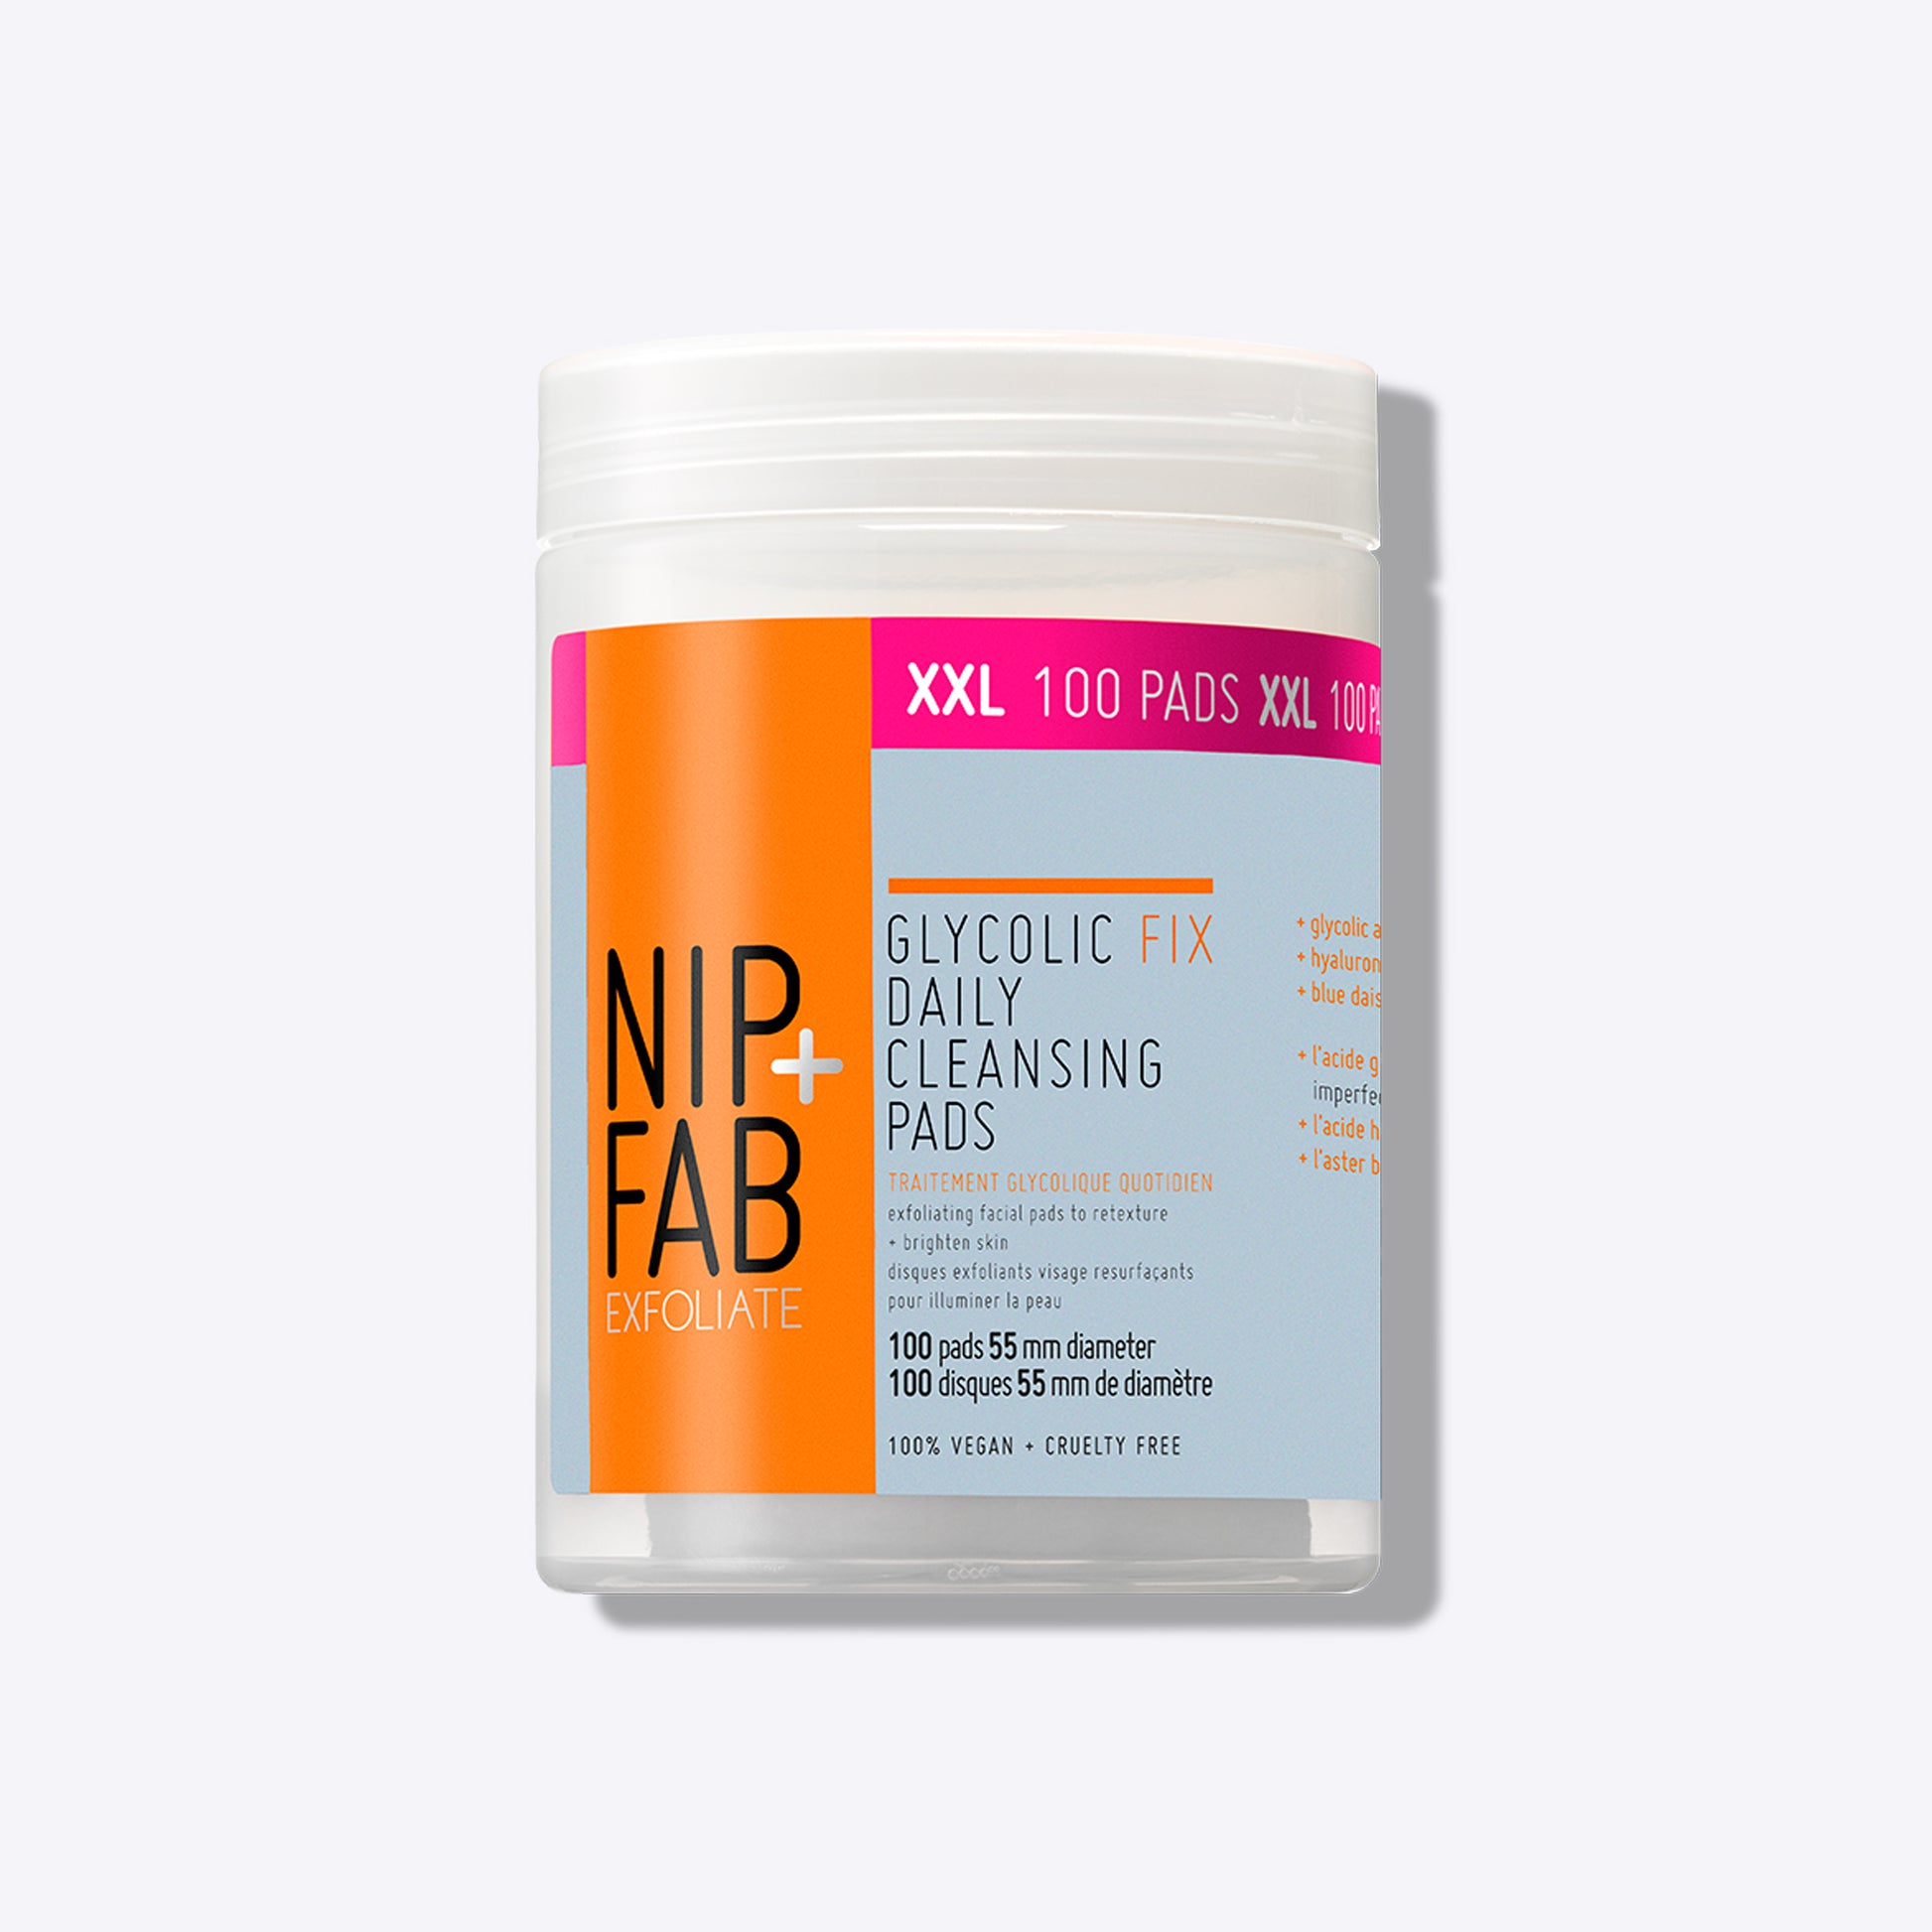 Glycolic Fix Daily Cleansing Pads XXL